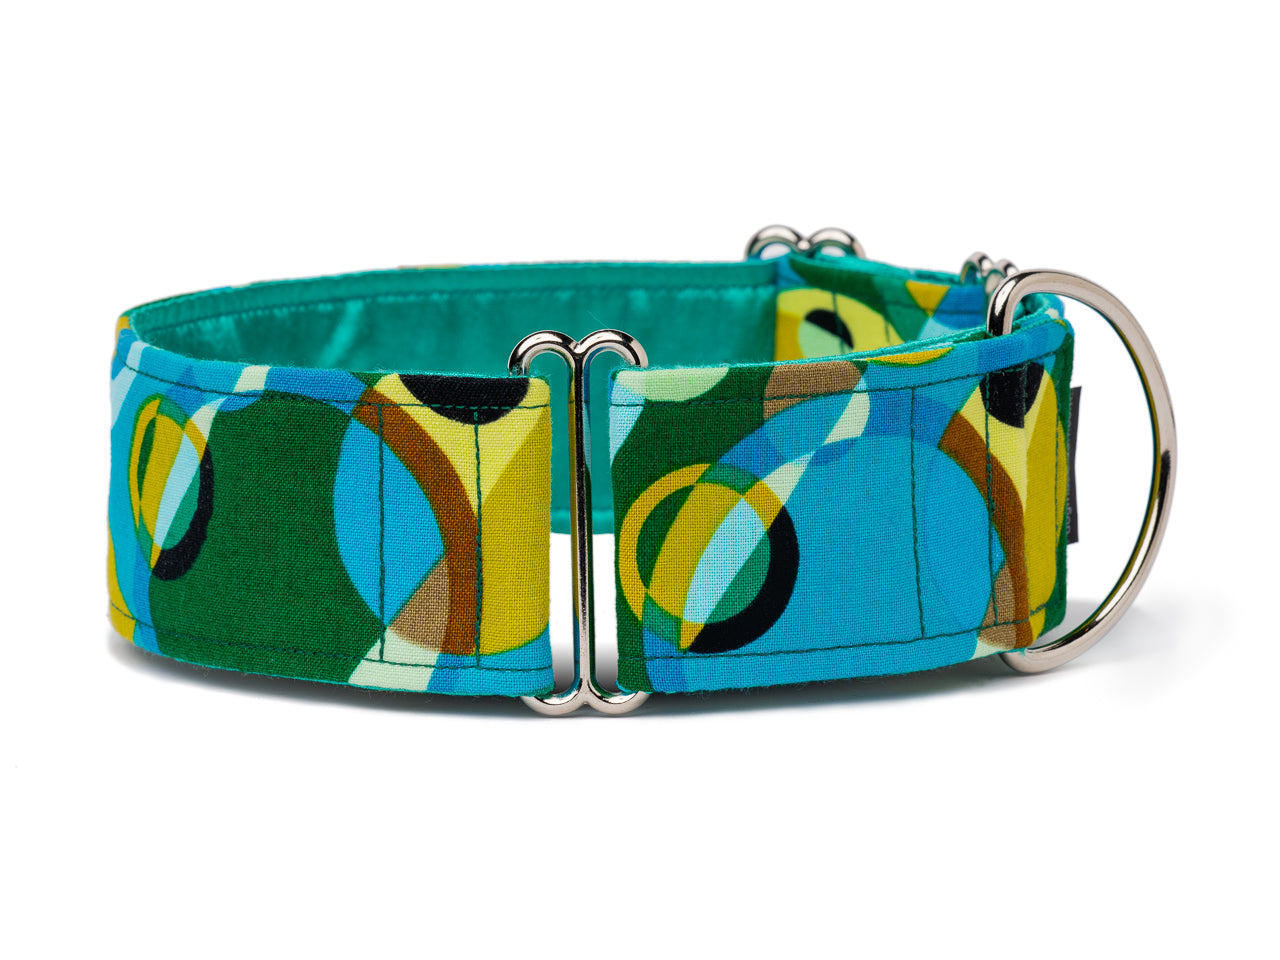 Swirls of blue and green are a sophisticated look for the elegant and refined hound!